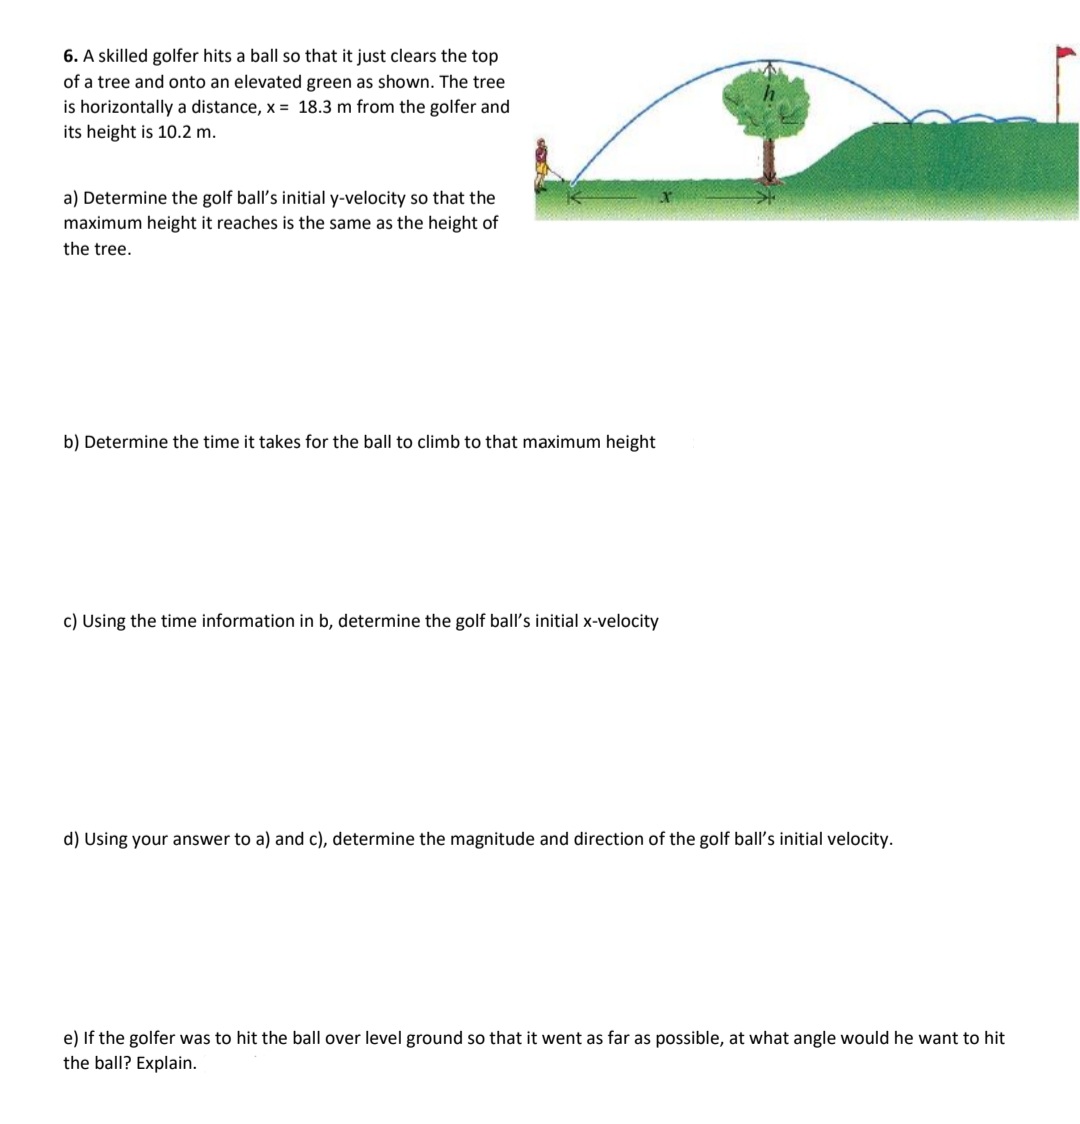 6. A skilled golfer hits a ball so that it just clears the top
of a tree and onto an elevated green as shown. The tree
is horizontally a distance, x = 18.3 m from the golfer and
its height is 10.2 m.
a) Determine the golf ball's initial y-velocity so that the
maximum height it reaches is the same as the height of
the tree.
b) Determine the time it takes for the ball to climb to that maximum height
c) Using the time information in b, determine the golf ball's initial x-velocity
d) Using your answer to a) and c), determine the magnitude and direction of the golf ball's initial velocity.
e) If the golfer was to hit the ball over level ground so that it went as far as possible, at what angle would he want to hit
the ball? Explain.
